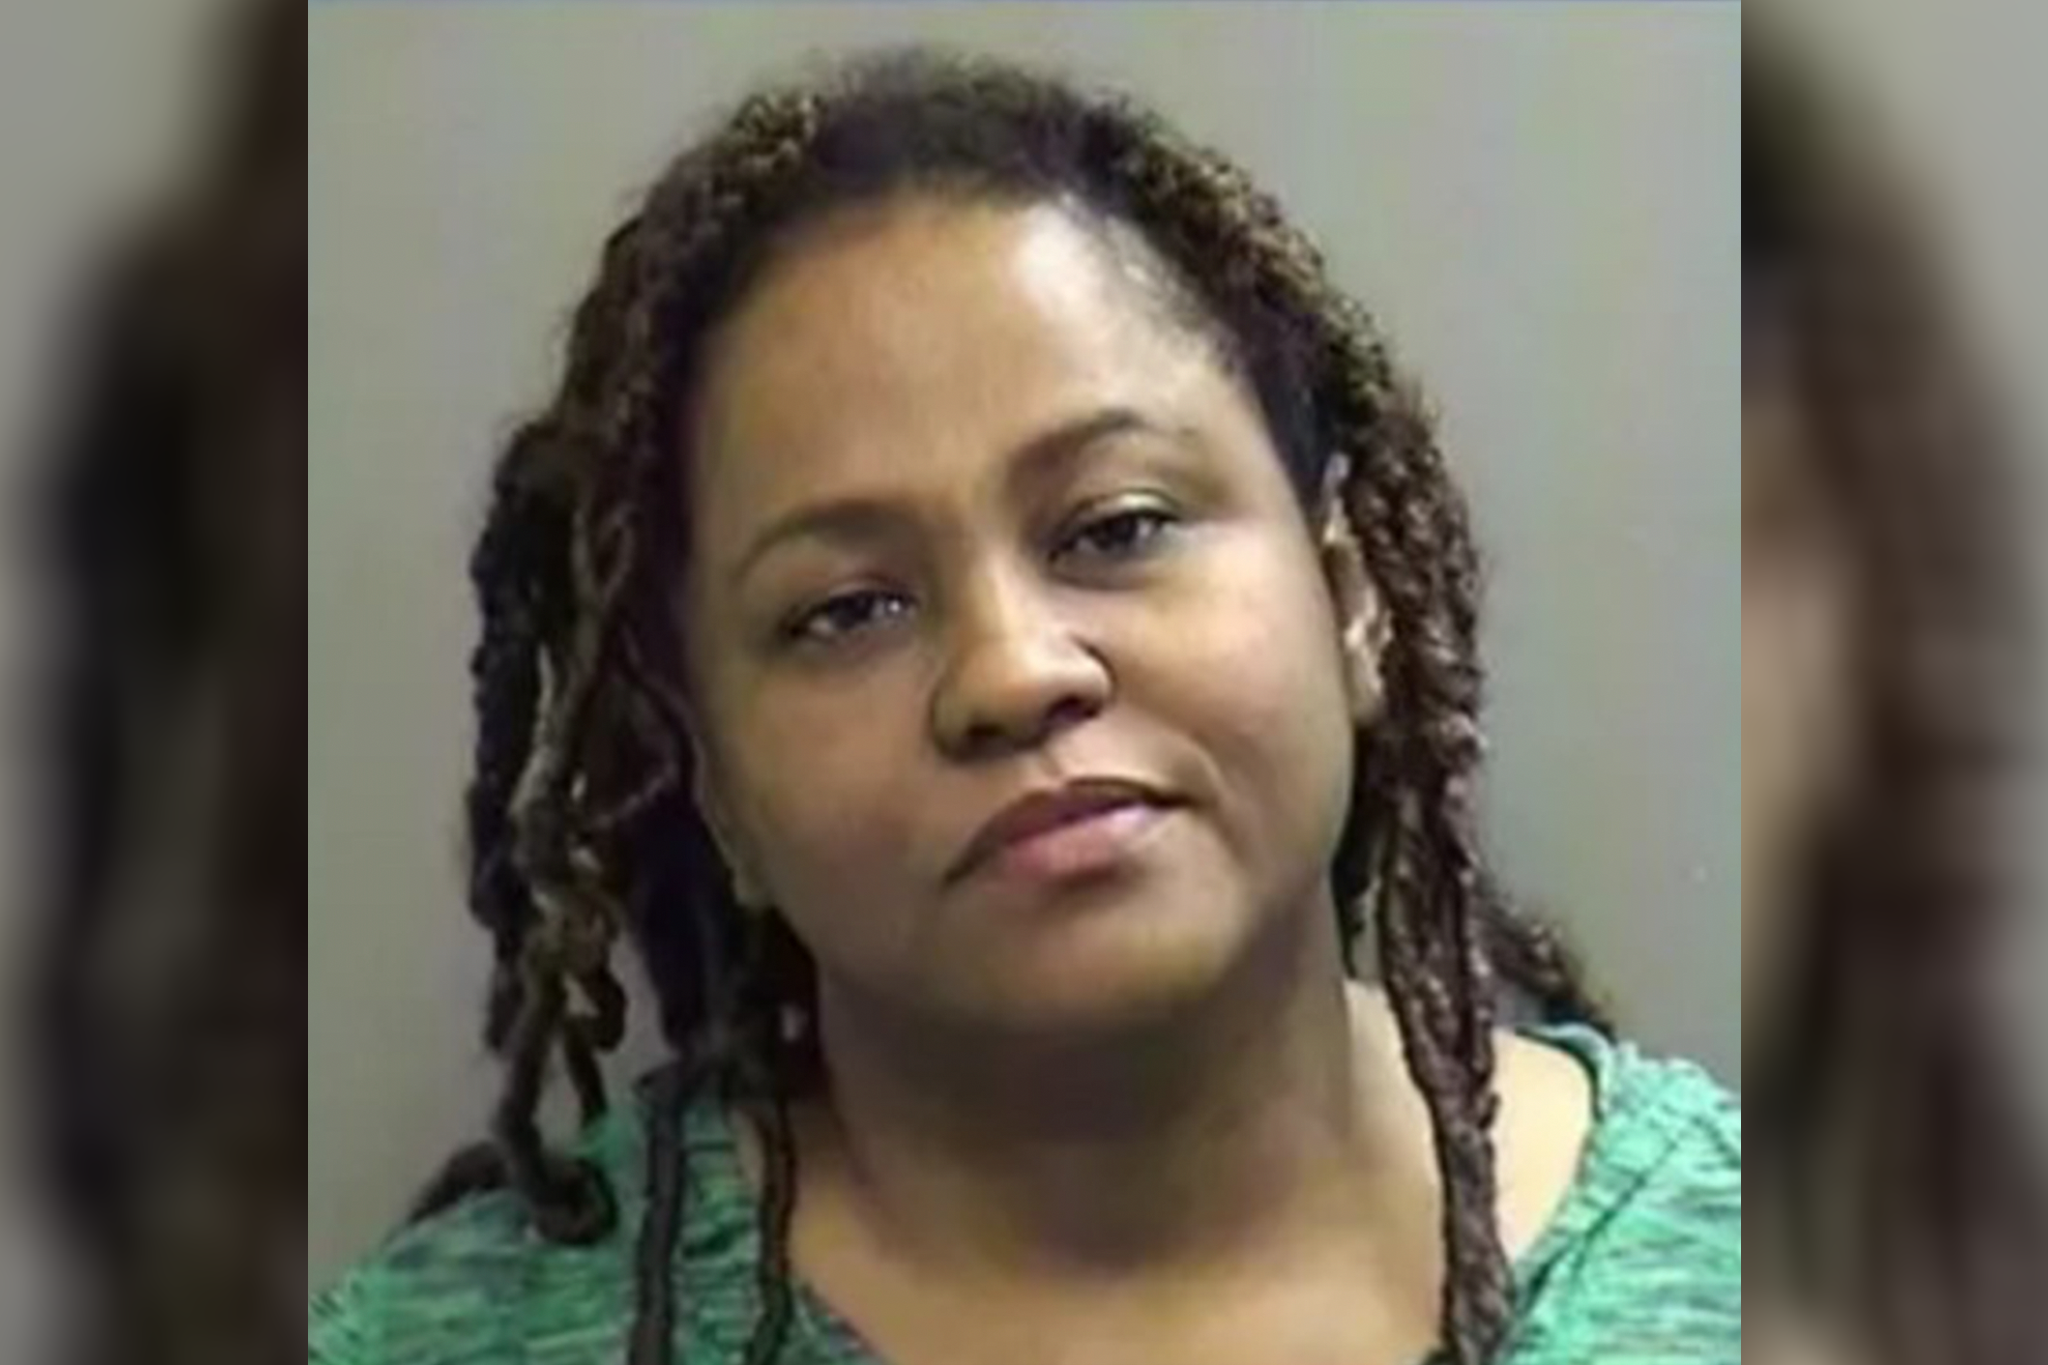 Regla ‘Su’ Becquer, who operated an illegal home-based healthcare company in Texas, has been charged with murder after one of her patients died